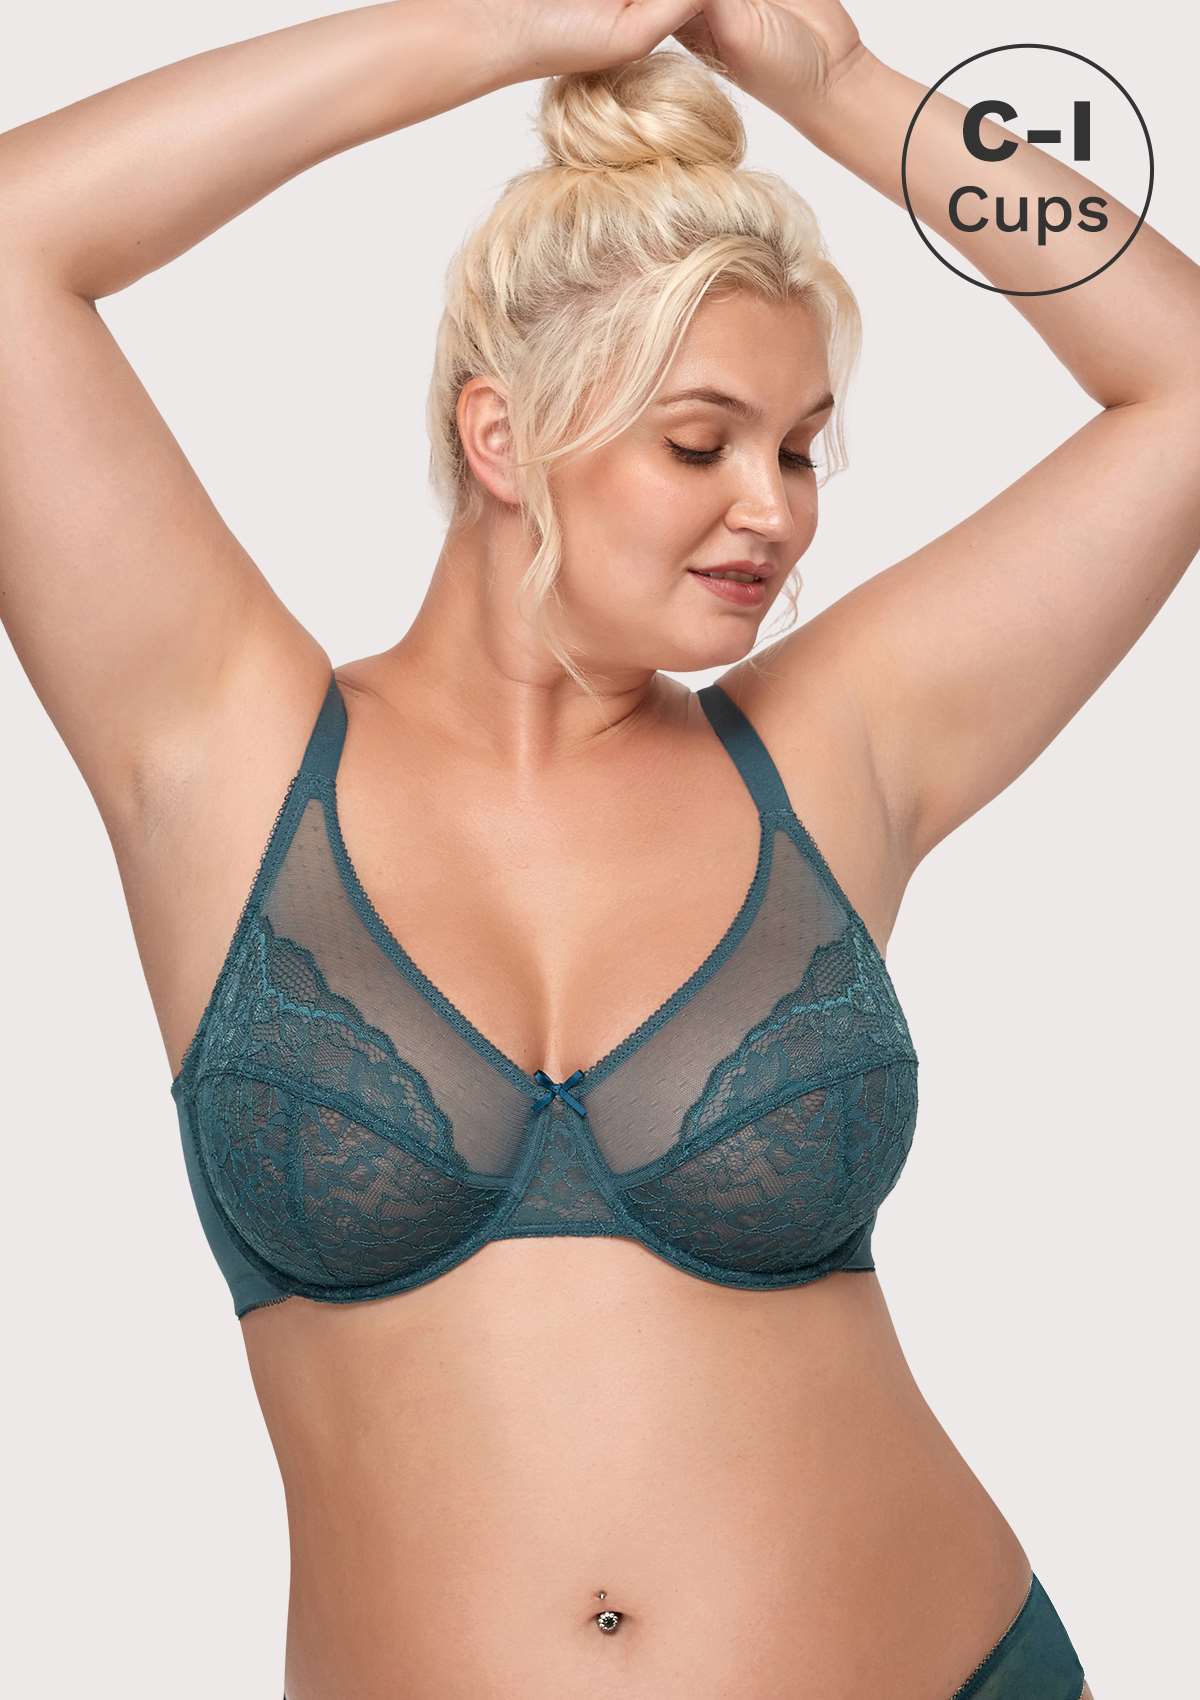 HSIA Enchante Full Coverage Bra: Supportive Bra For Big Busts - Royal Blue / 32 / C